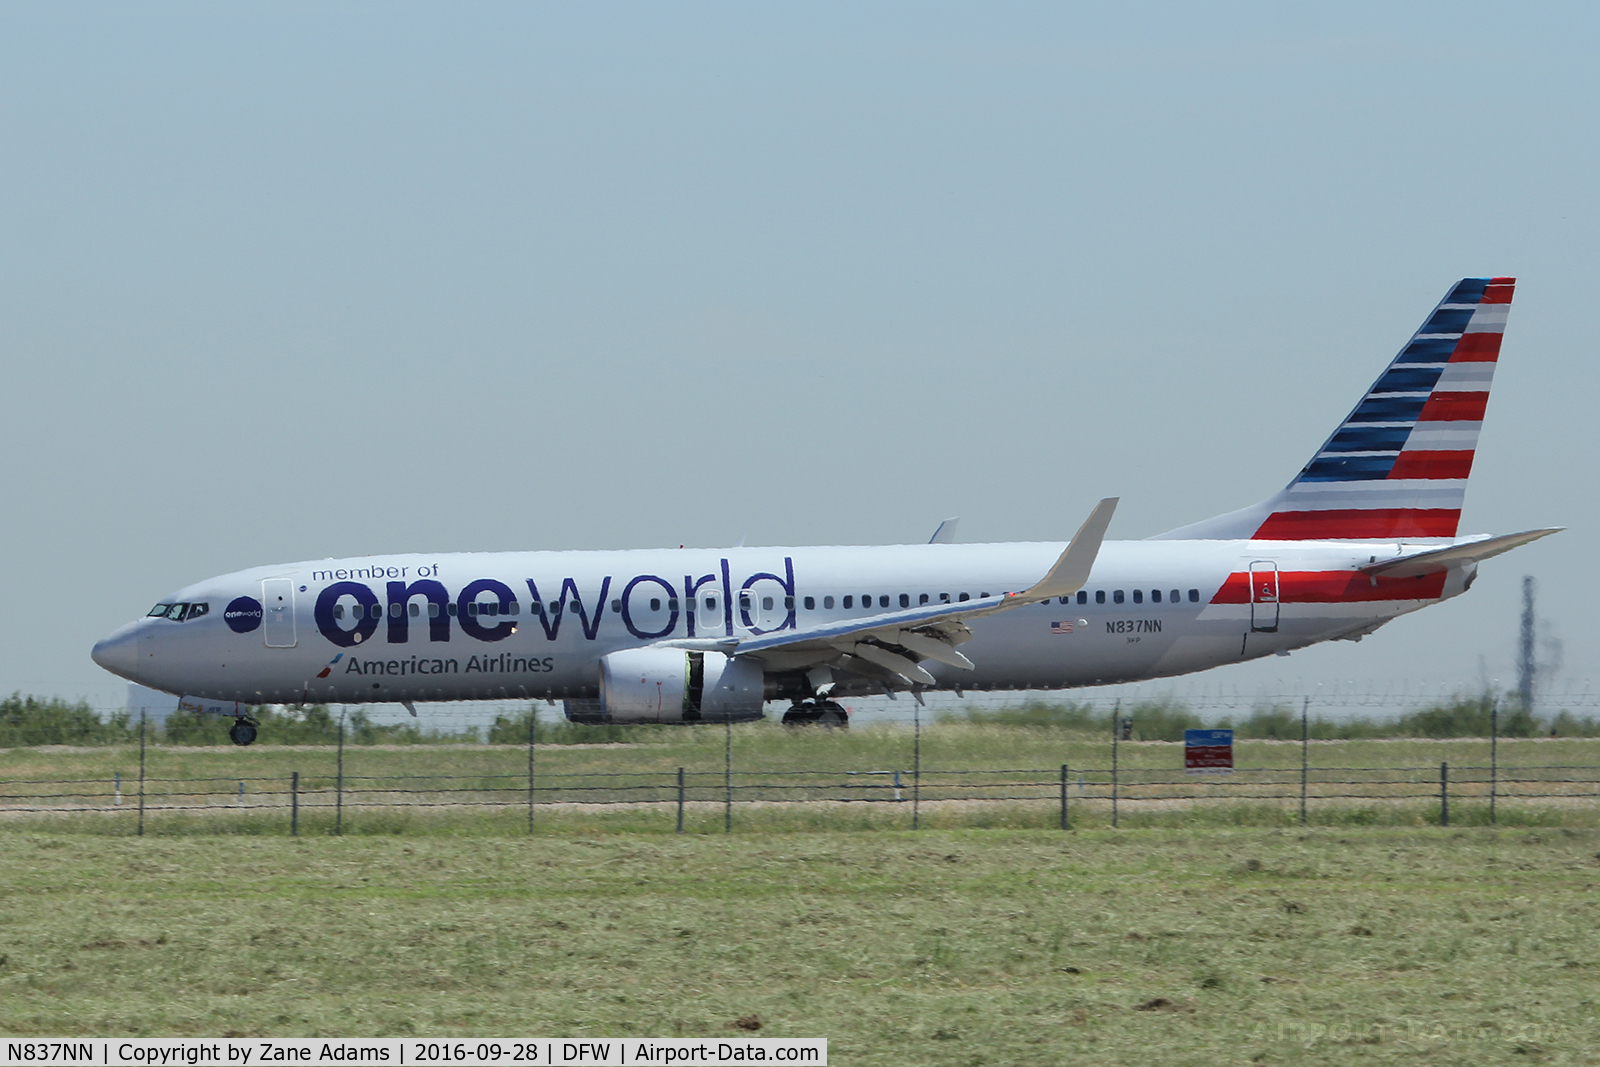 N837NN, 2010 Boeing 737-823 C/N 30908, American Airlines One World at DFW Airport